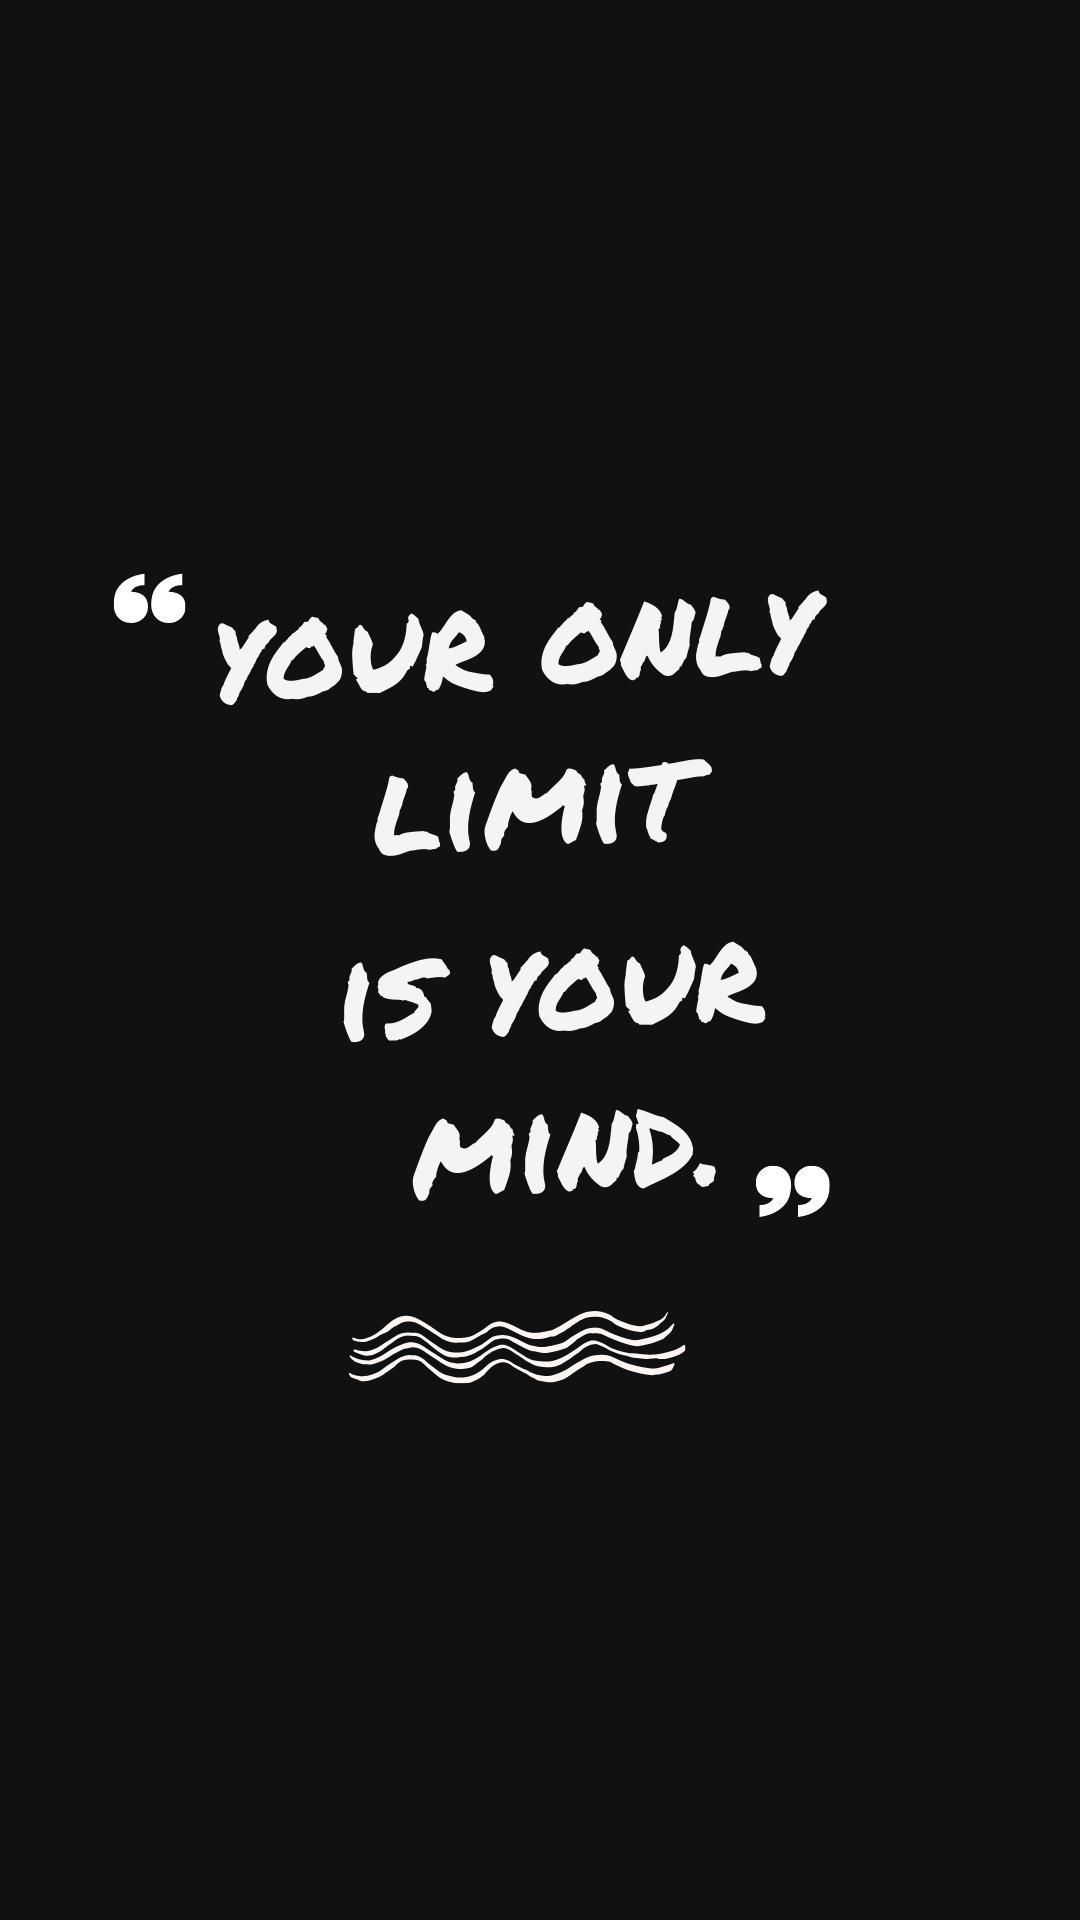 Your only limit is the amount of effort you put in - Motivational, gym, inspirational, positivity